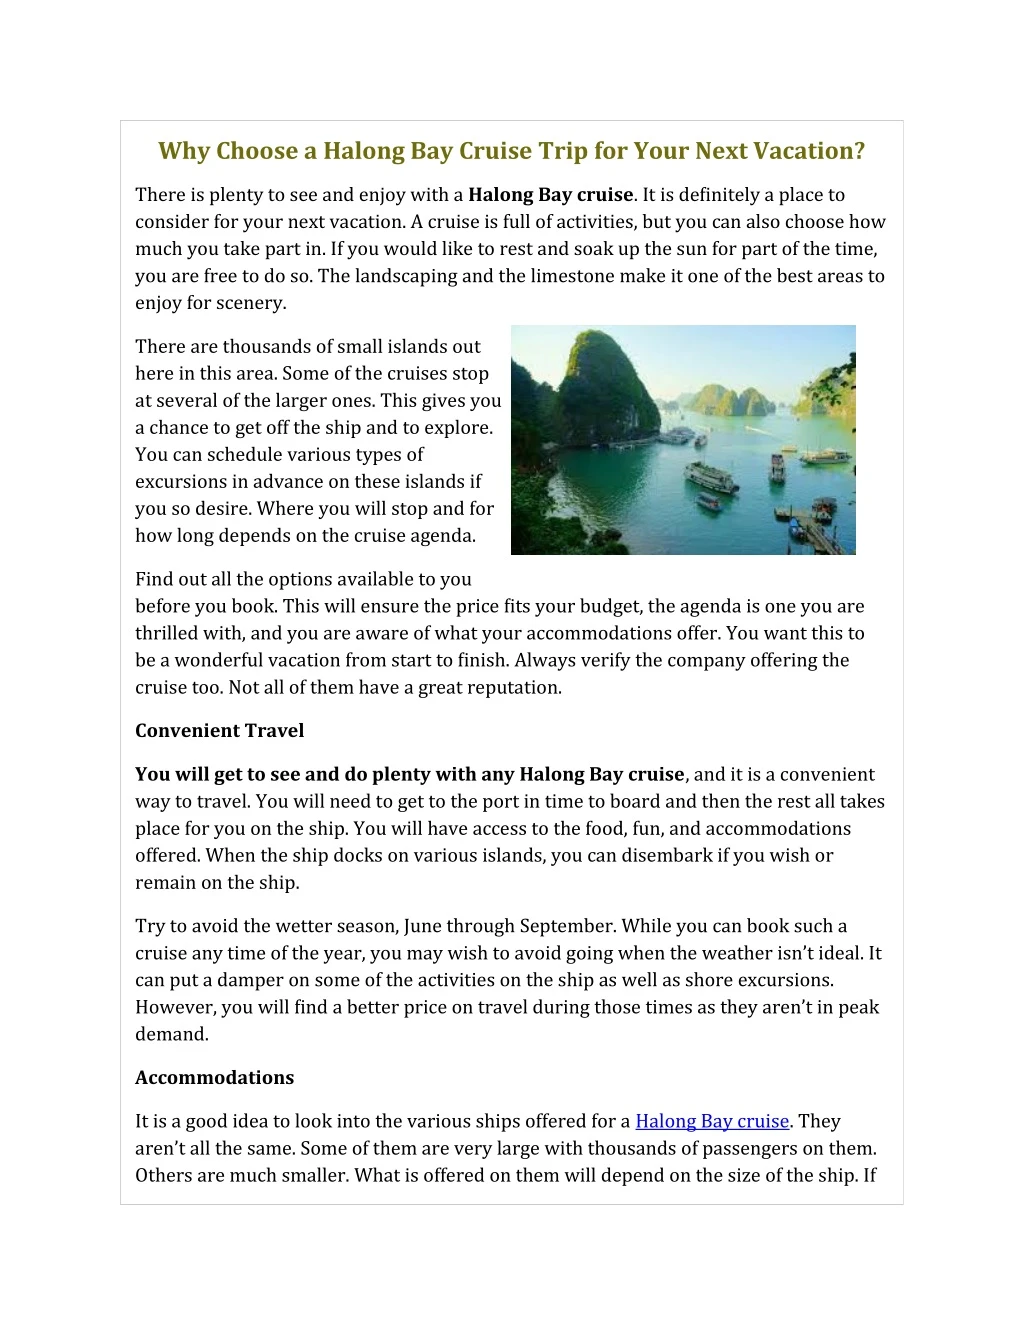 why choose a halong bay cruise trip for your next